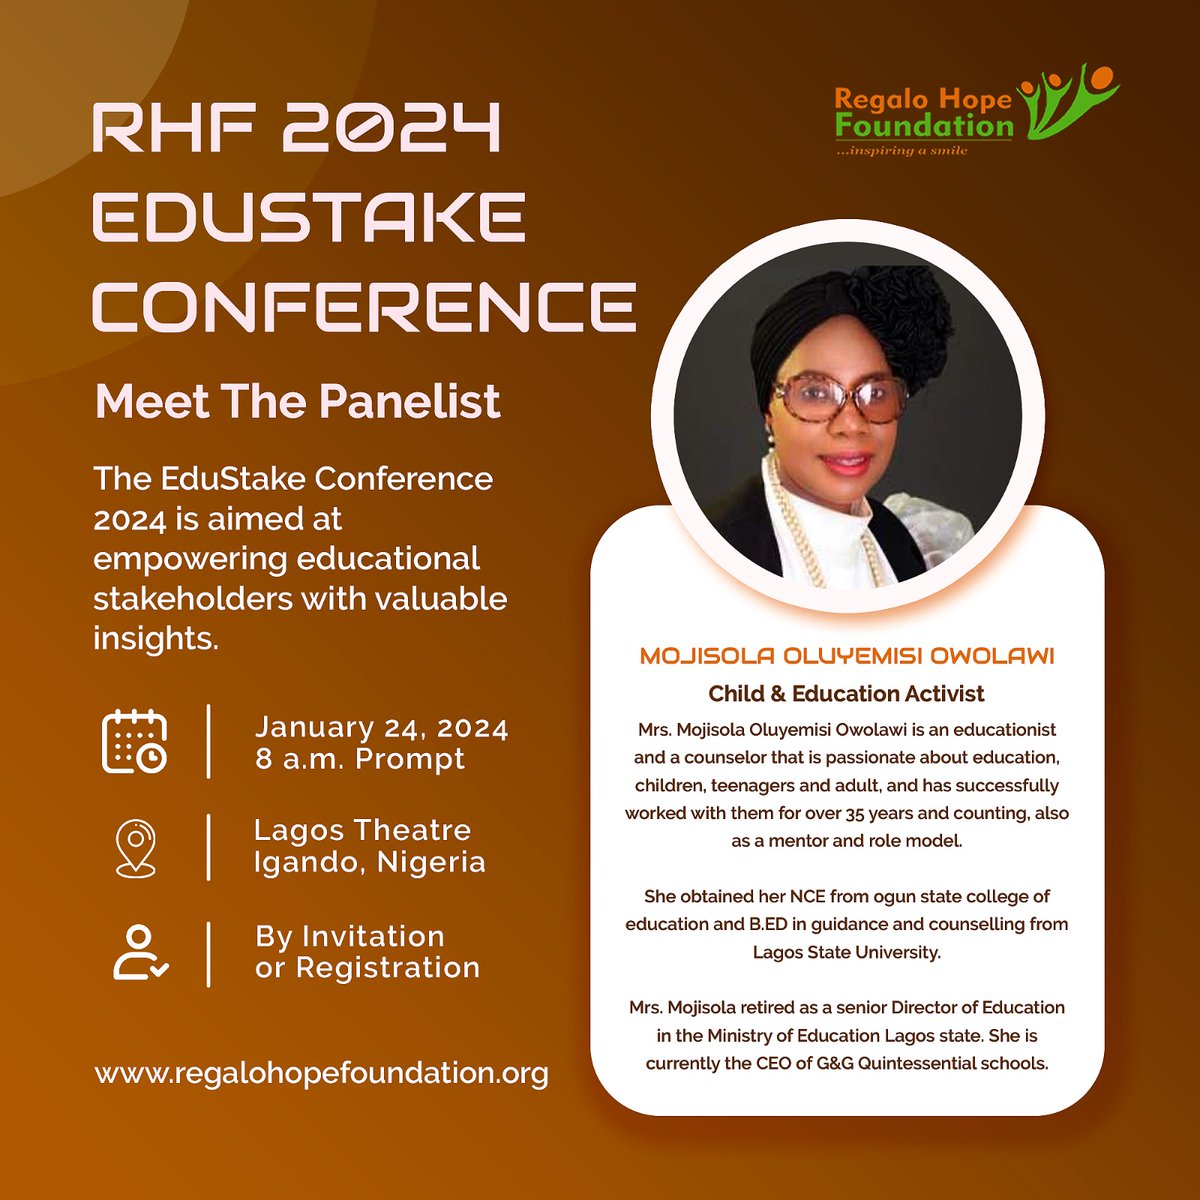 We are counting down to the Edustake Conference 2024.

Click the link below to see details on the conference.

thenationonlineng.net/foundation-to-…

See you there!

#RegaloEducation #Edustakeconference #Edustake2024 #RegaloInspires #RegaloEmpowers #regalohopefoundation #RHF